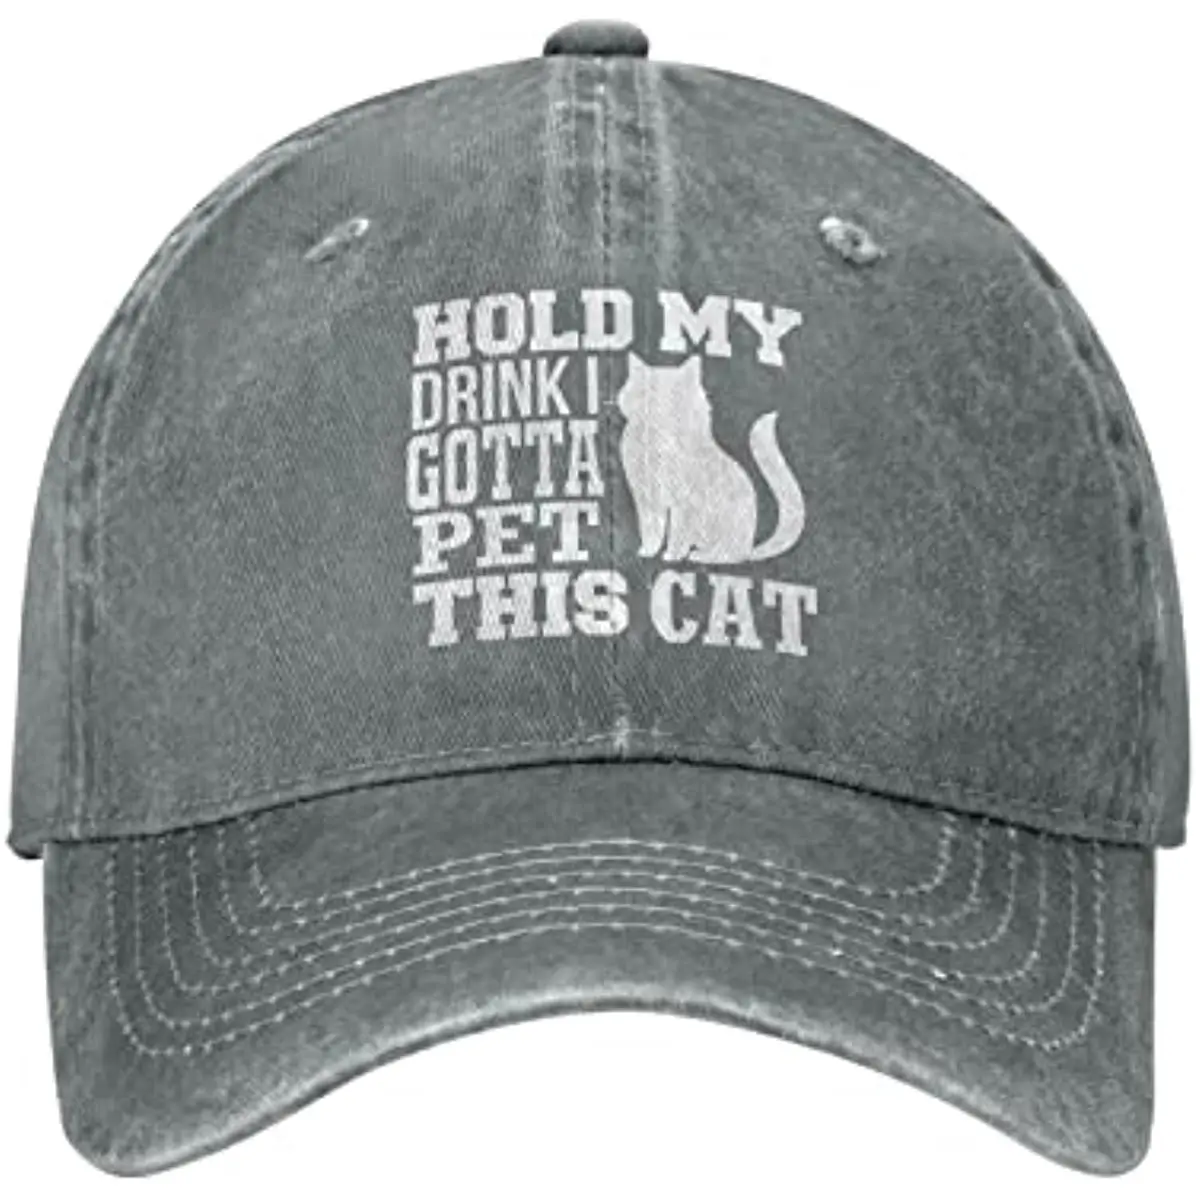 

Cat Lover Hat Hold My Drink I Got Pet This Cats Hat Men Baseball Cap Graphic Hats Adult Four Seasons Casual Snapback Cap